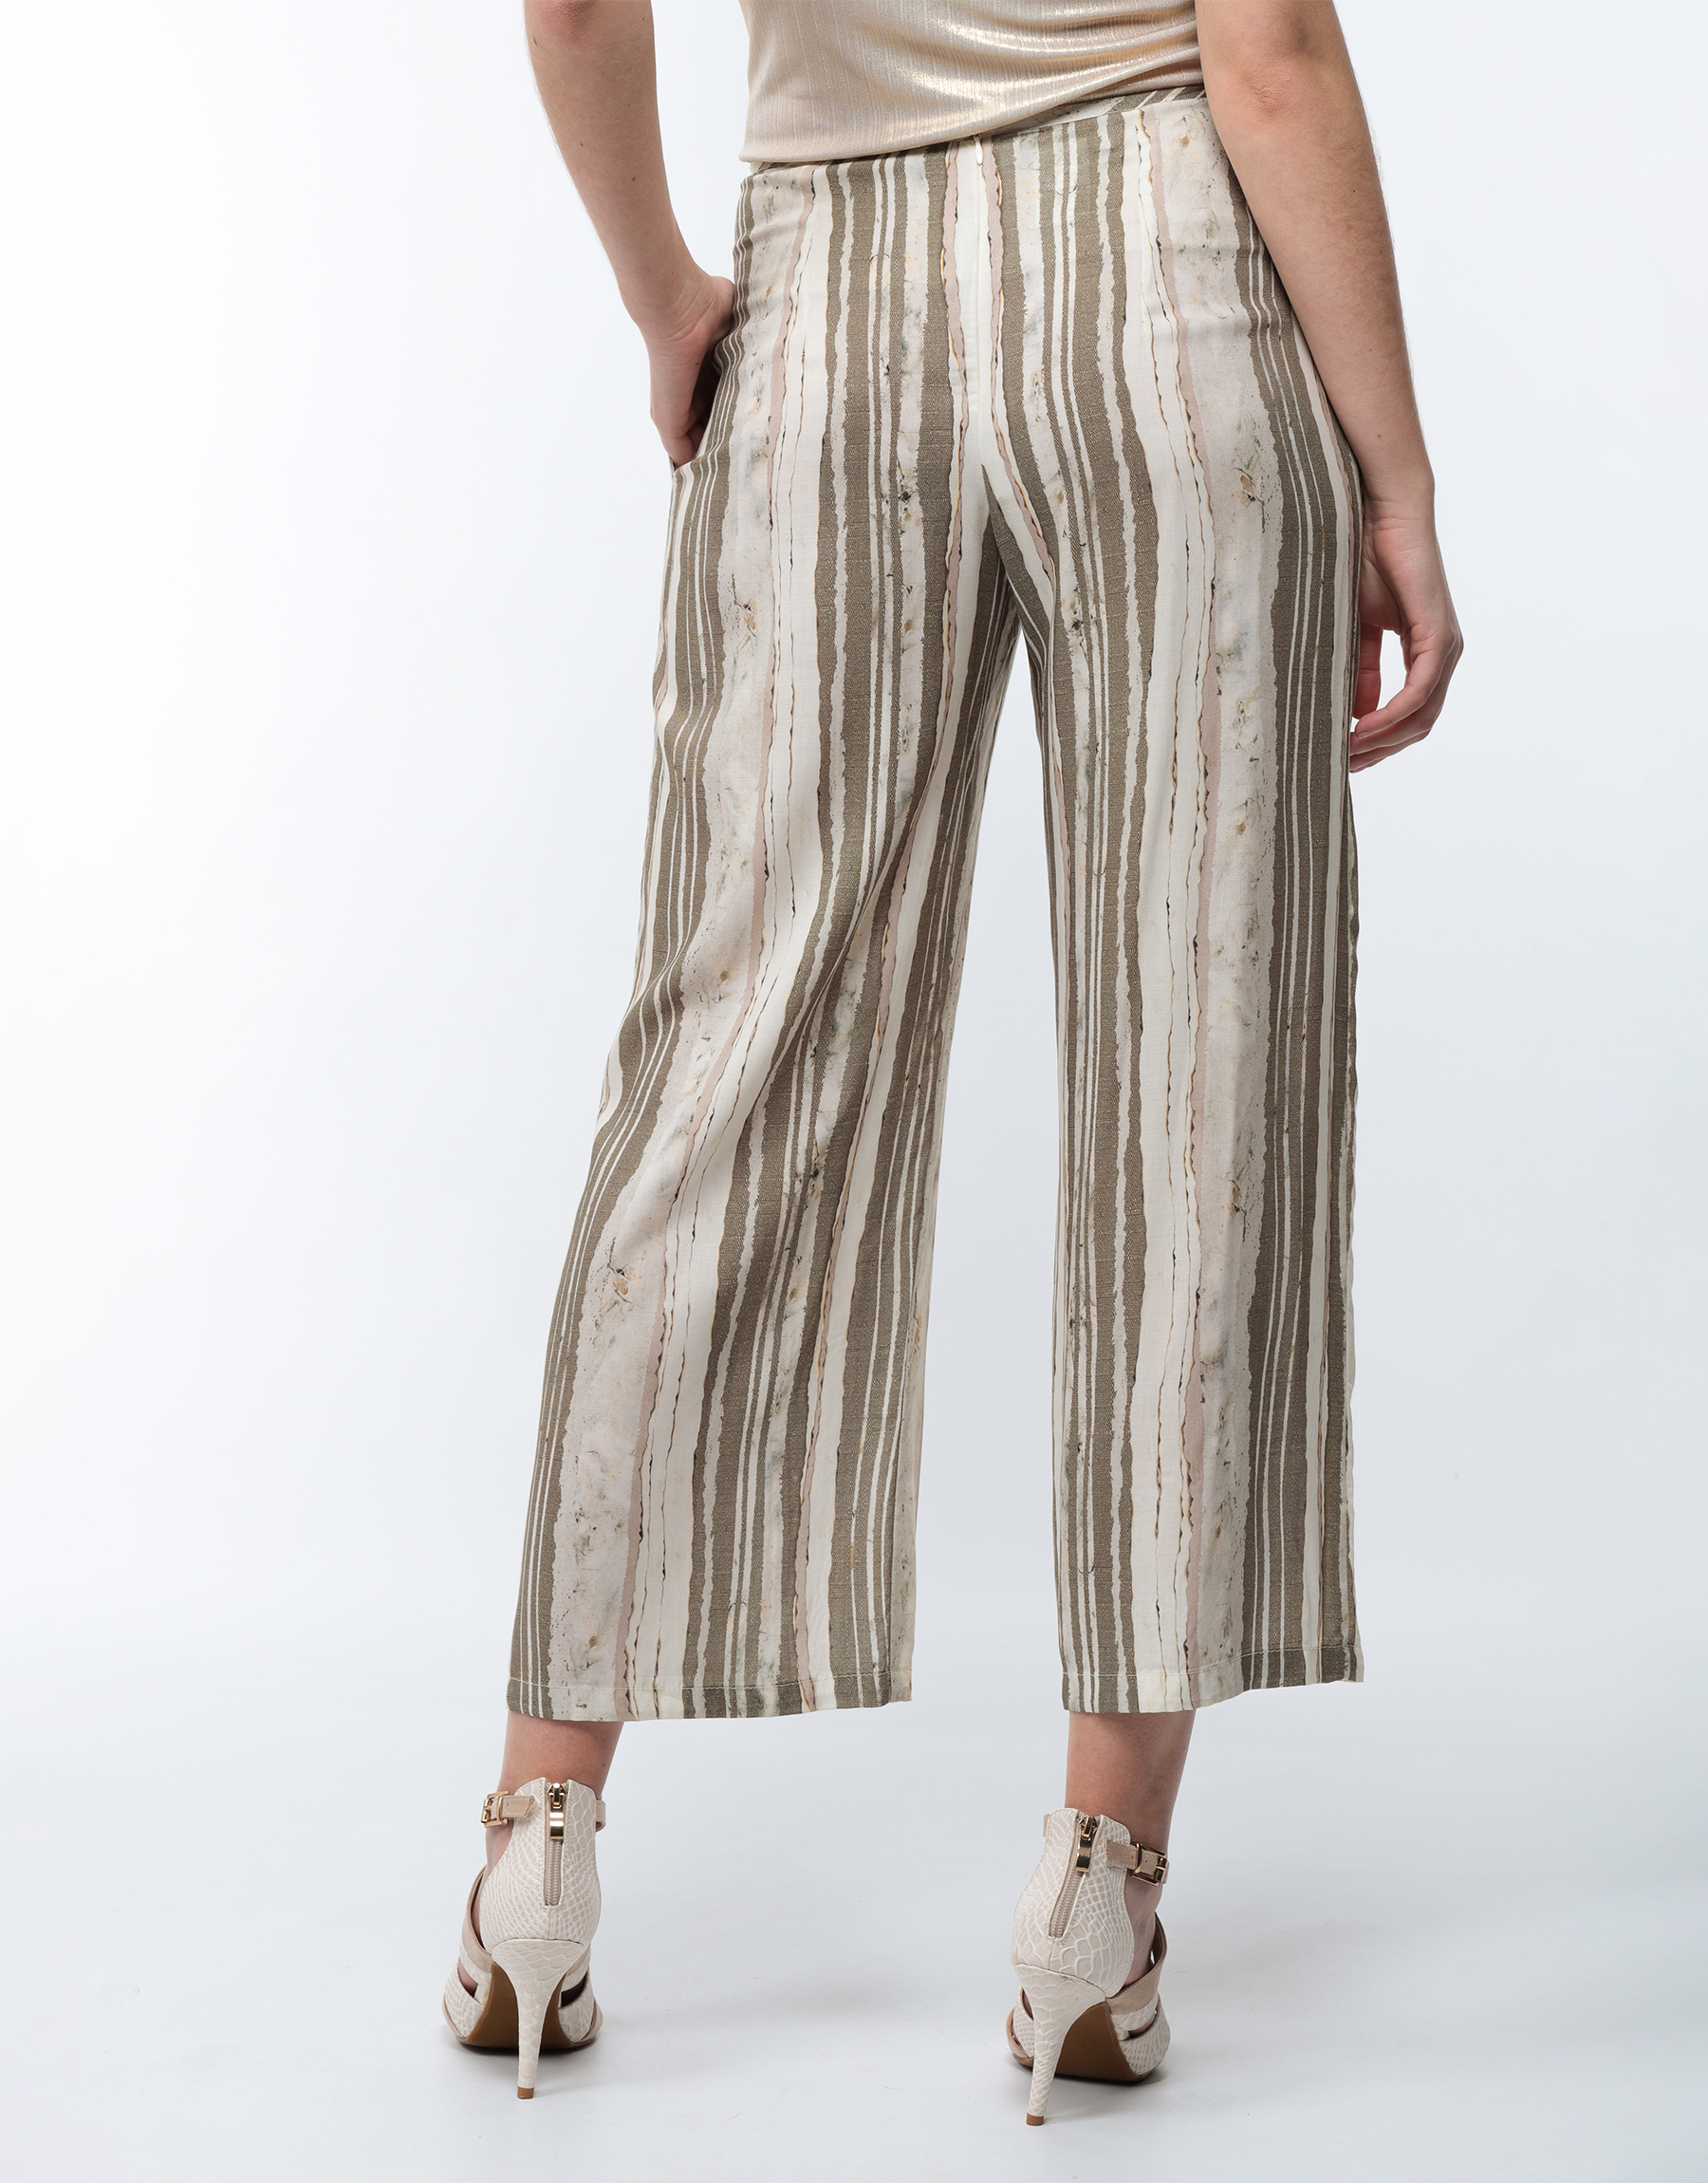 Summer trousers 7/8 in viscose and silk printed striped khaki and ivory 